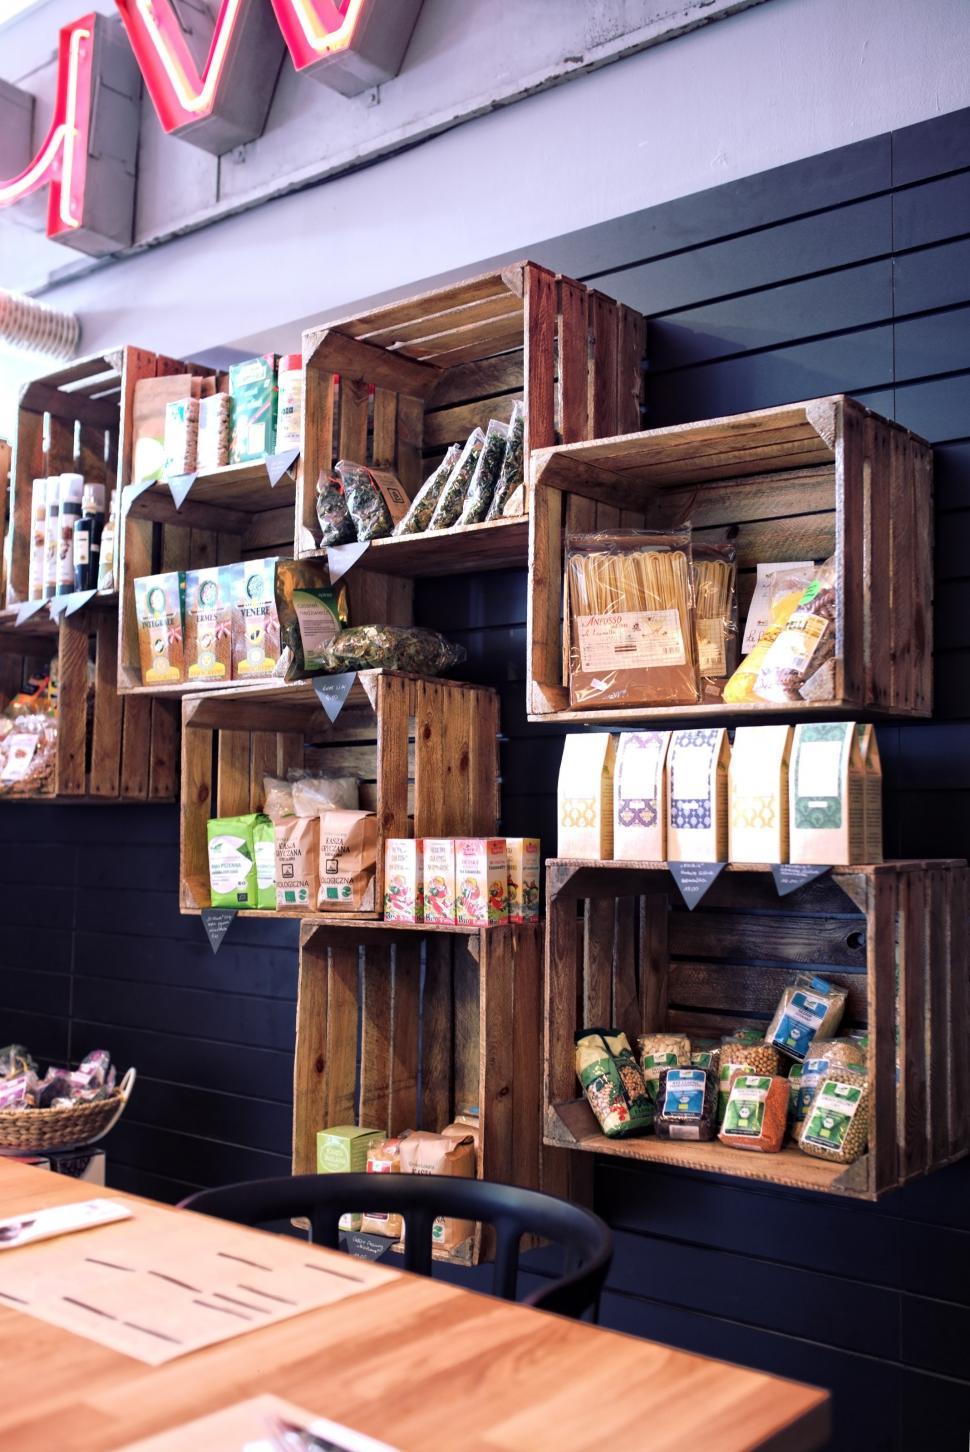 Free Image of Wooden Crates Adorning Restaurant Wall 